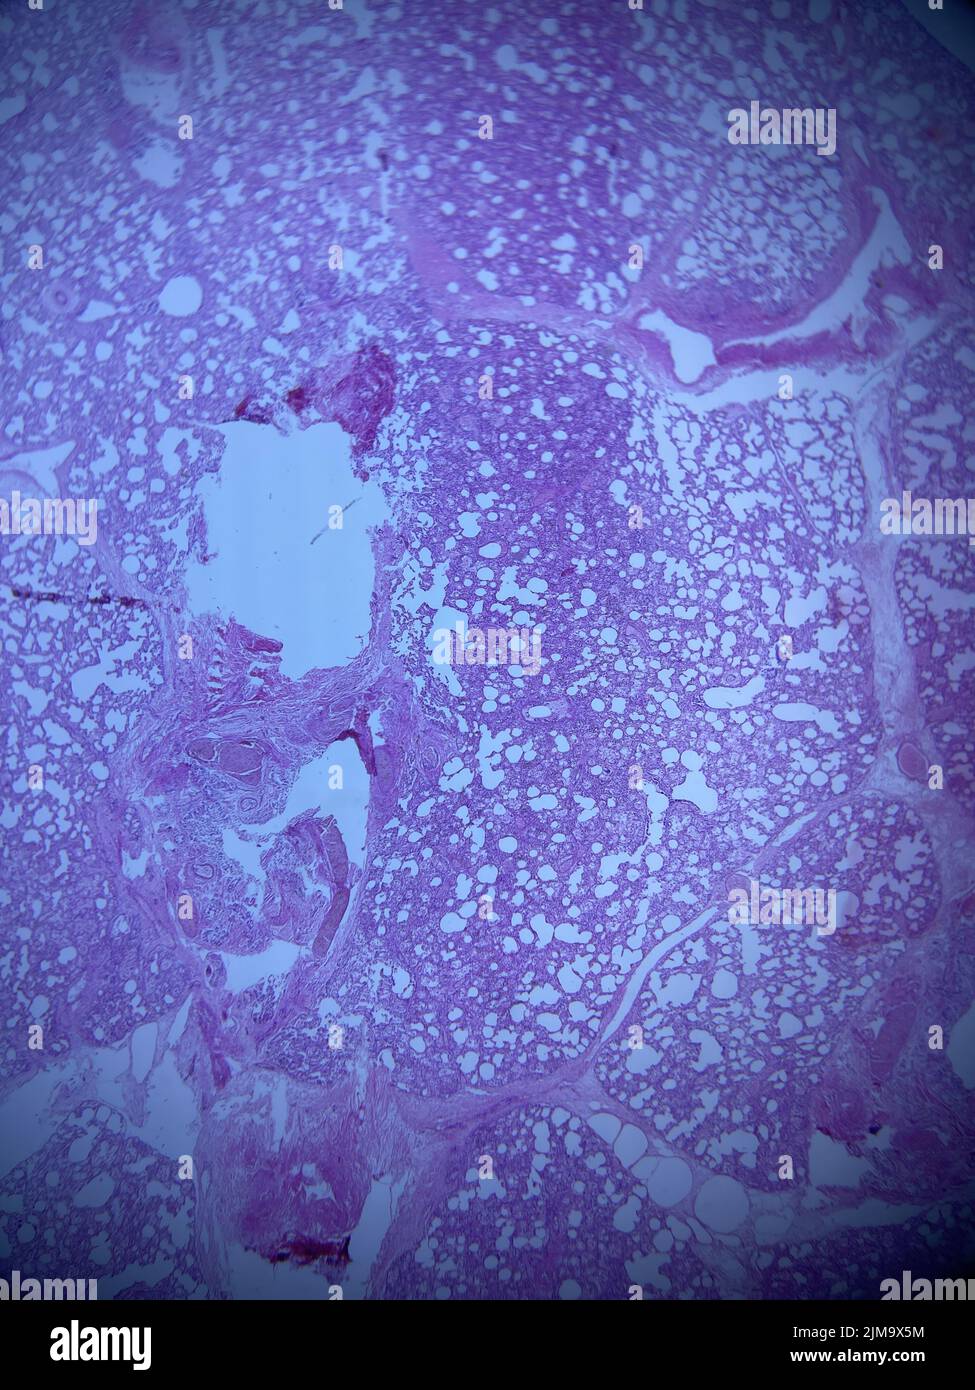 Lung tissue histology in the mobile microscopic view. H and E staining. Pink purple color. Neutrophil infiltration with a background of pneumonia. Stock Photo